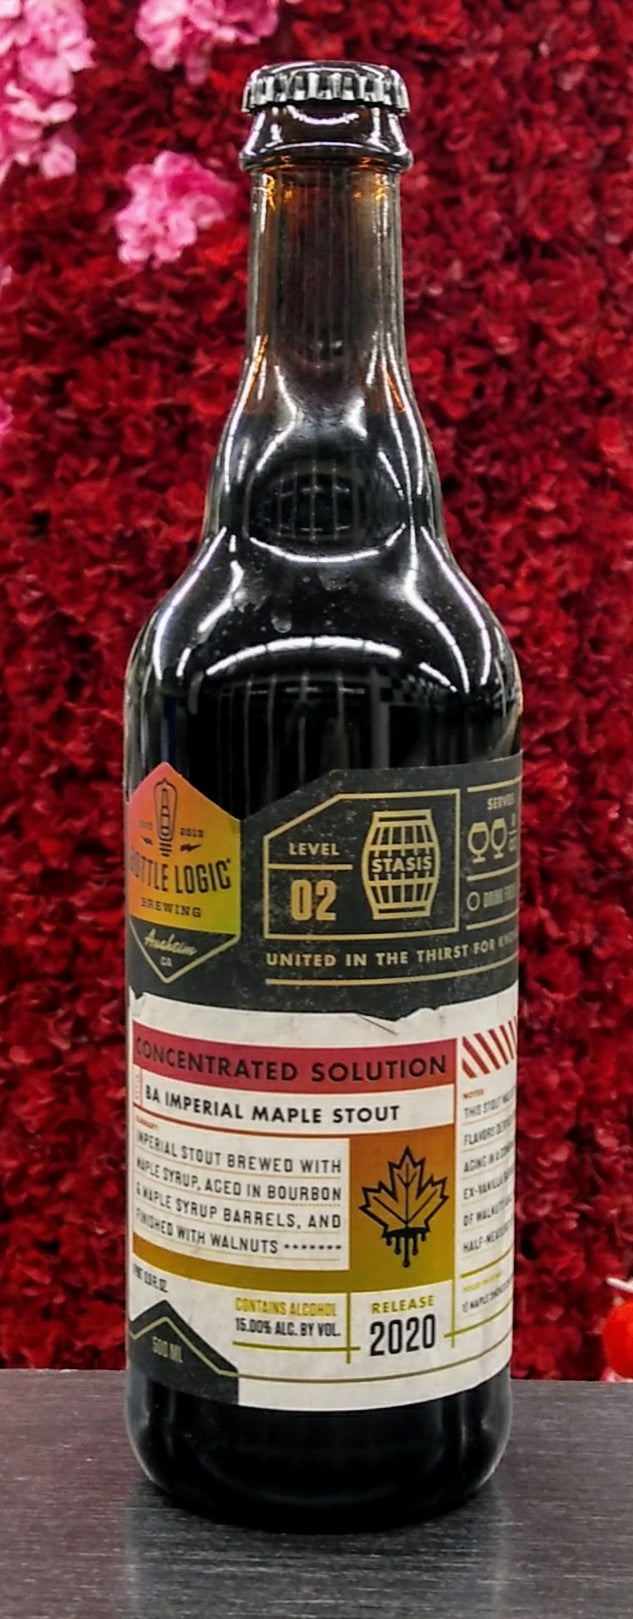 BOTTLE LOGIC BREWING 2020 CONCENTRATED SOLUTION BA IMPERIAL MAPLE STOUT 500ML (LIMIT 1)